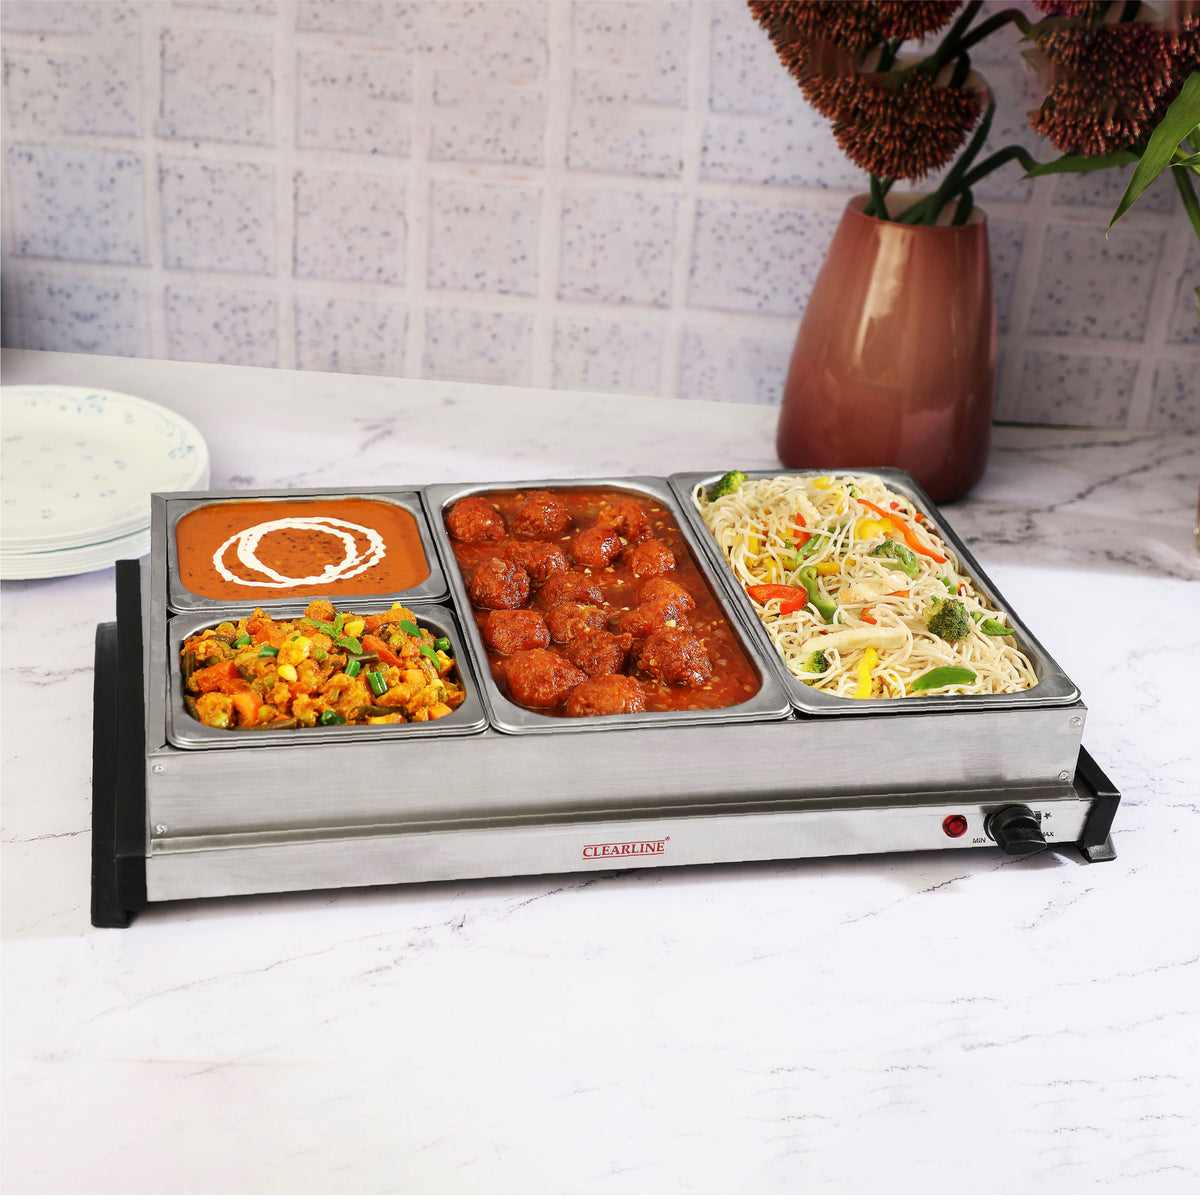 Stainless Steel 4 Pan Ss Food Warmer And Buffet Server Fwbs-02